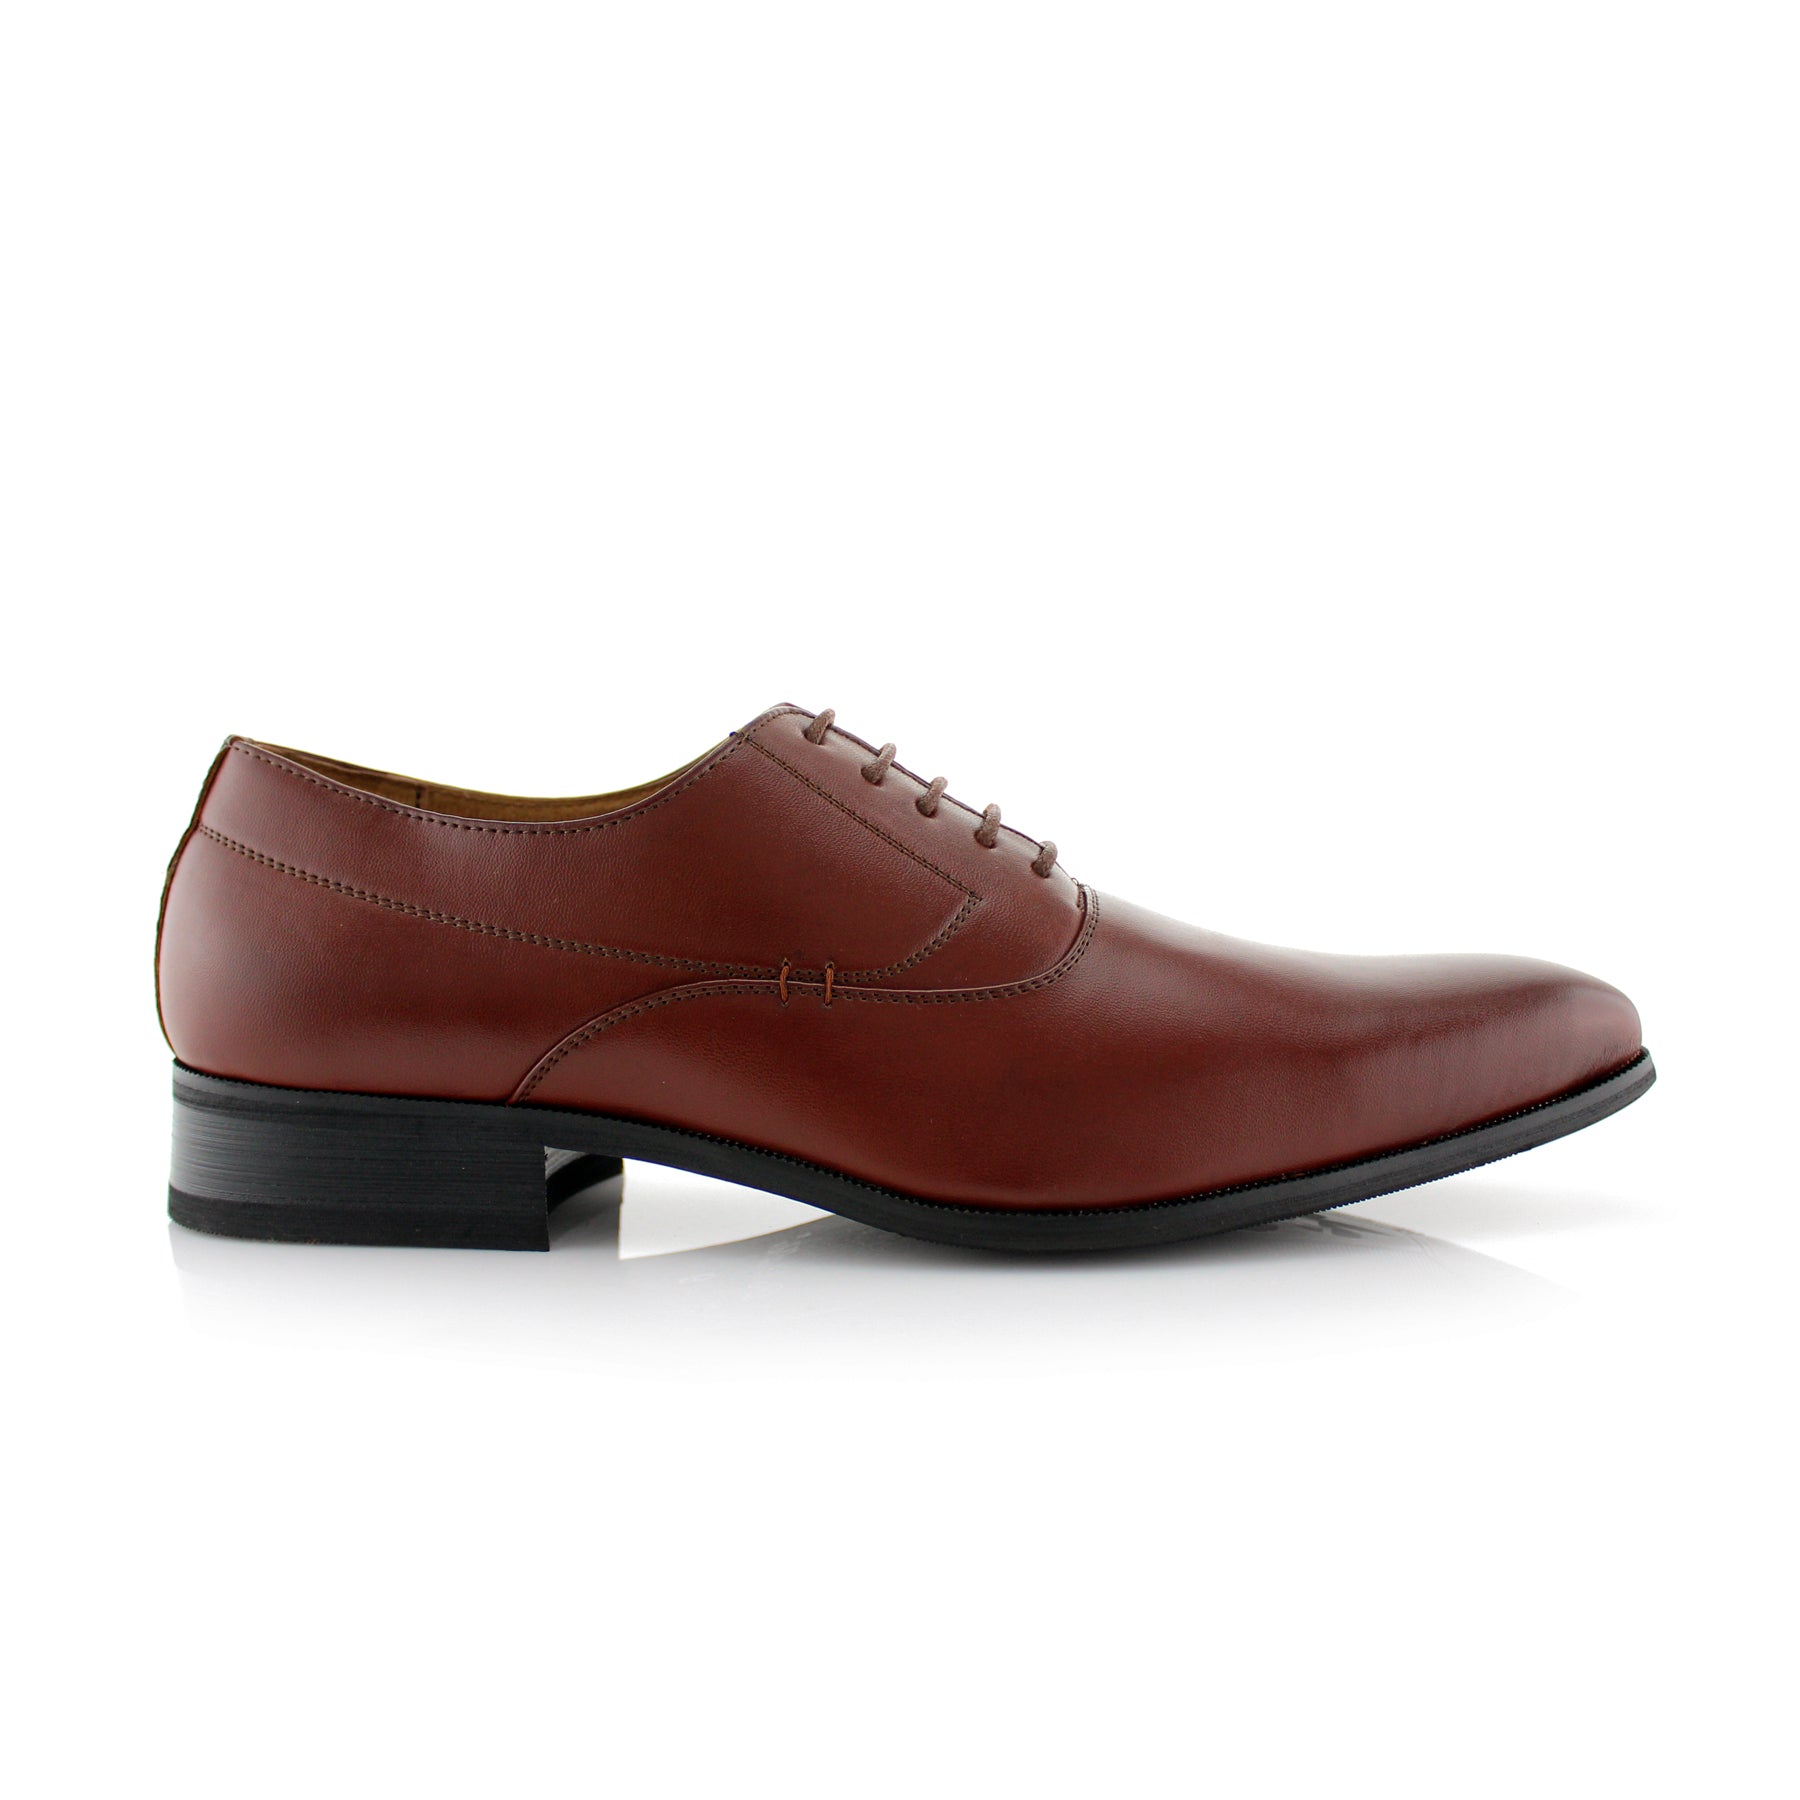 Classic Formal Oxfords | Frank by Delli Aldo | Conal Footwear | Outer Side Angle View